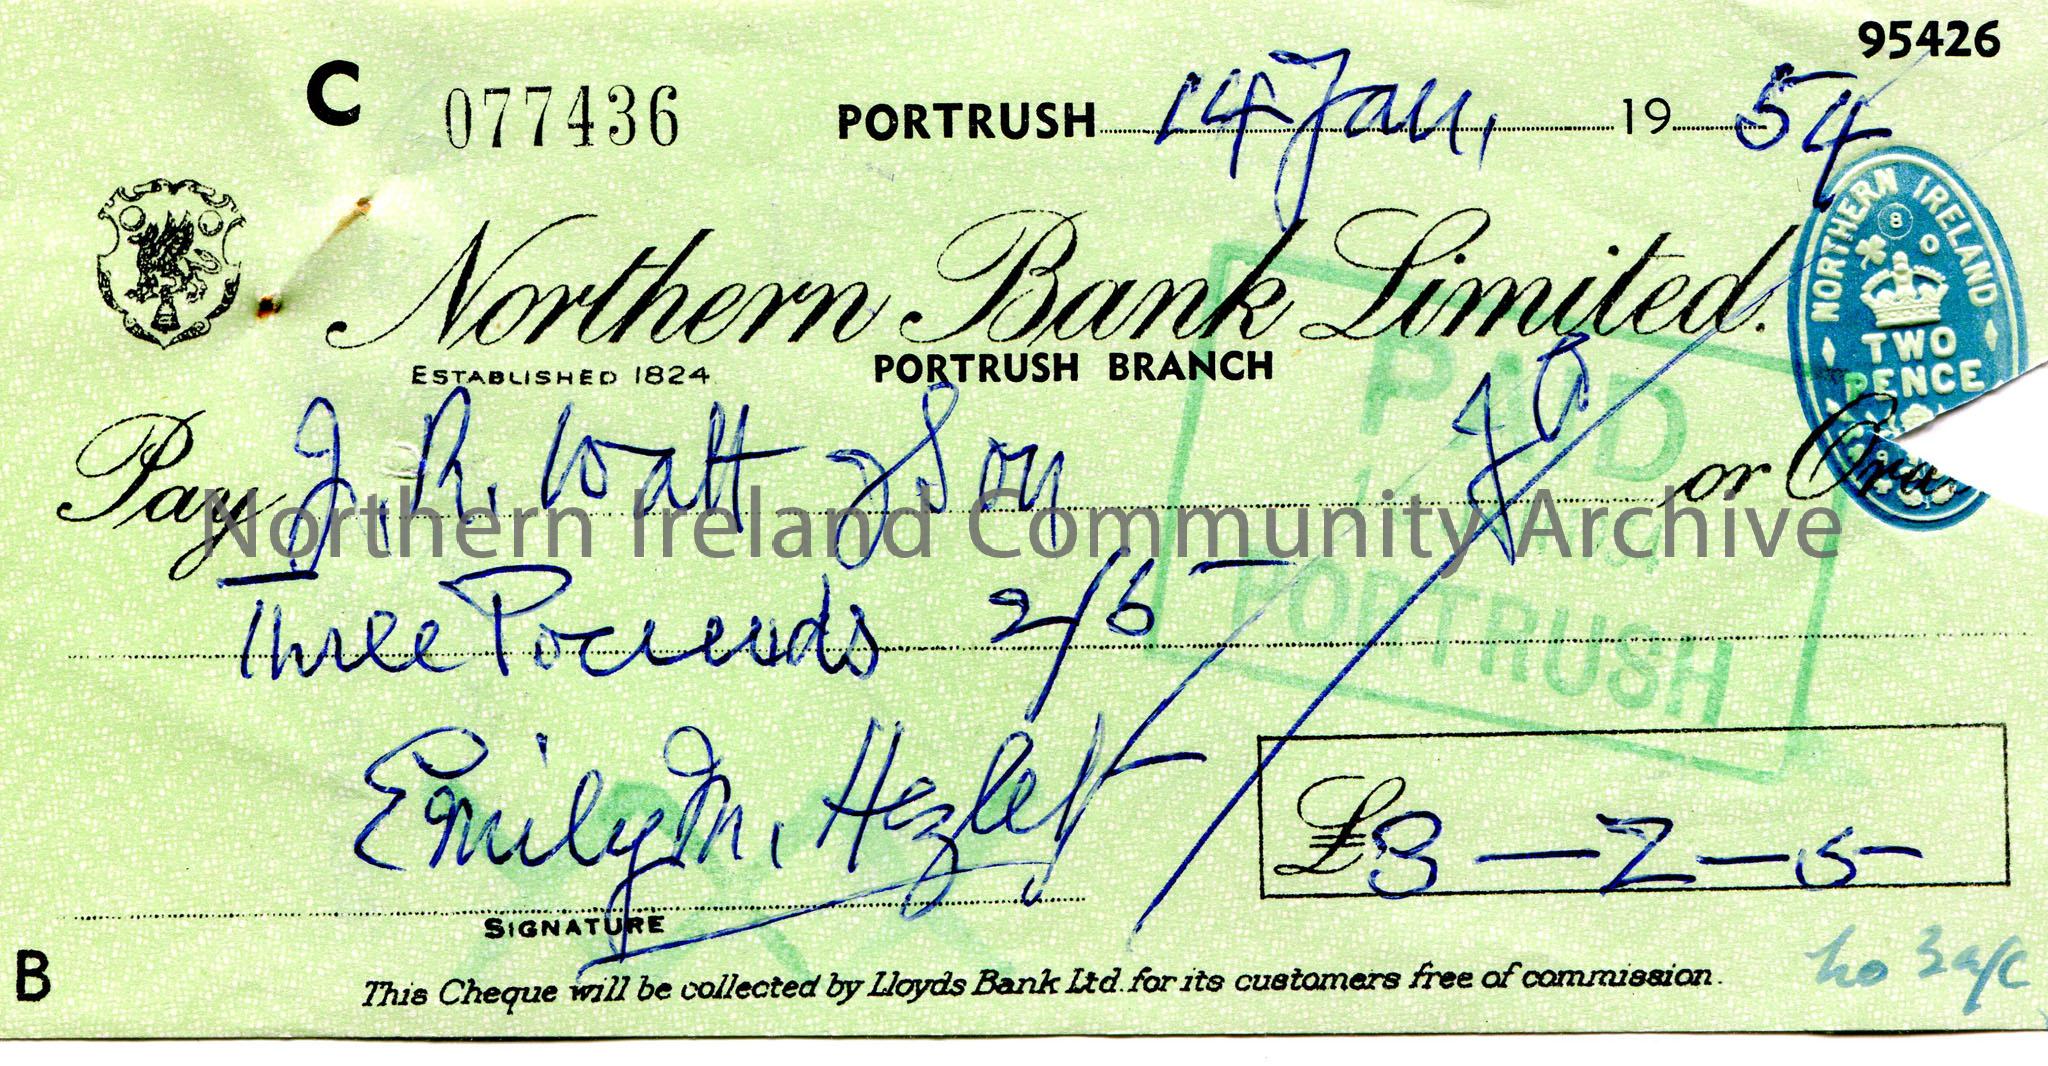 Northern Bank Limited, Portrush branch, cheque. Dated 14th January, 1954. Payable to J. R. Watt & Son from Emily M. Hezlet for £3.2.5. Paid stamp…